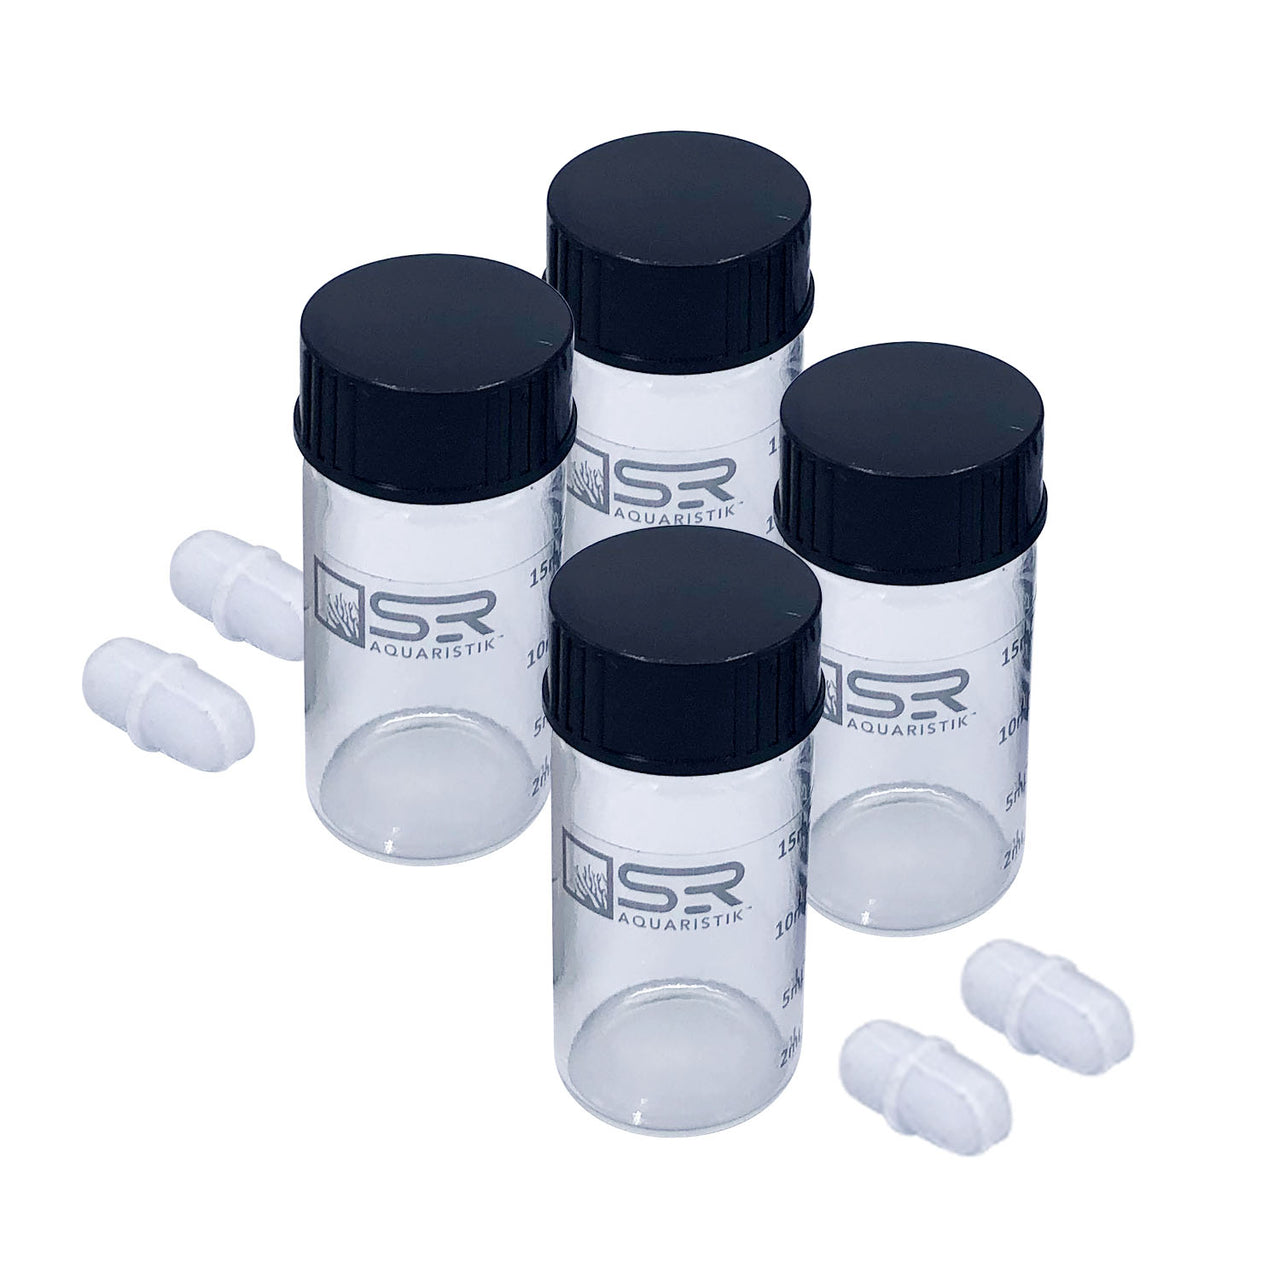 Speed Test Mixer Accessory Kit (4 Pack of Vials and Stir Bars)